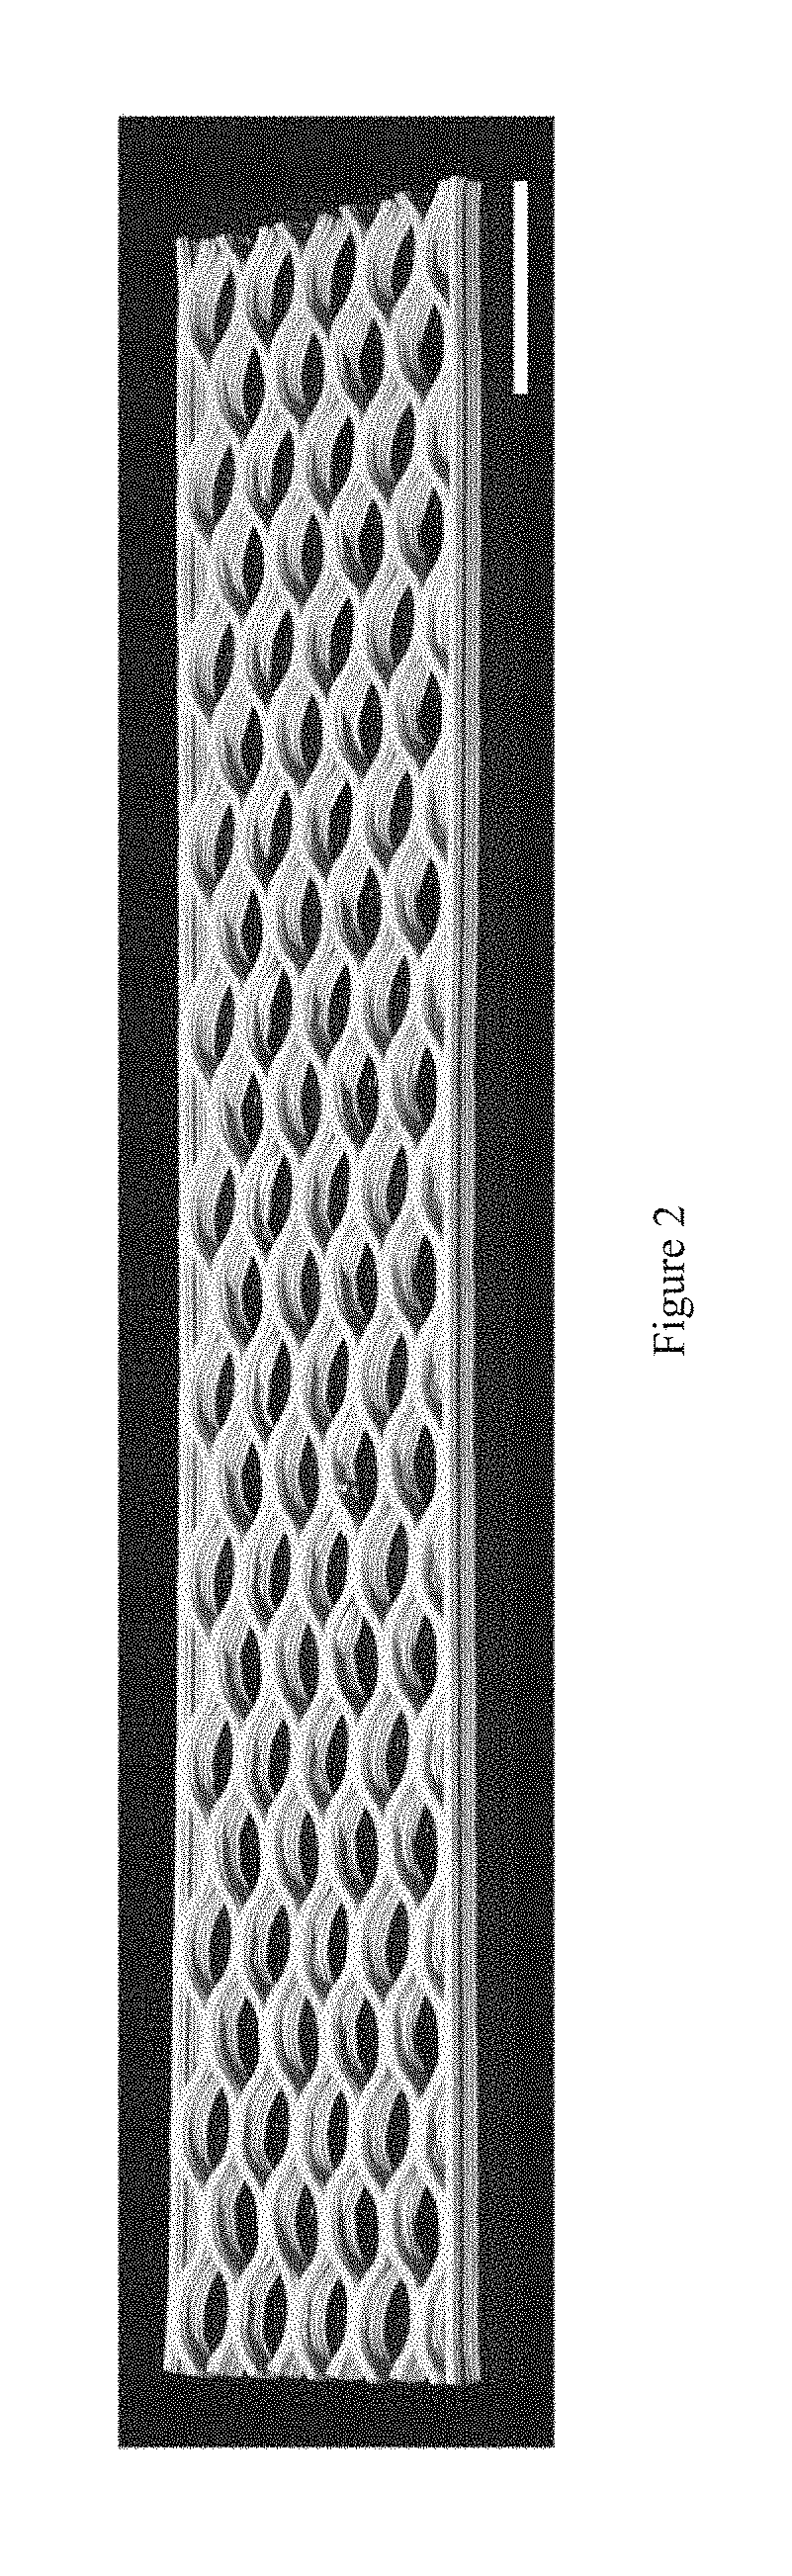 System and method for four-dimensional printing of ceramic origami structures